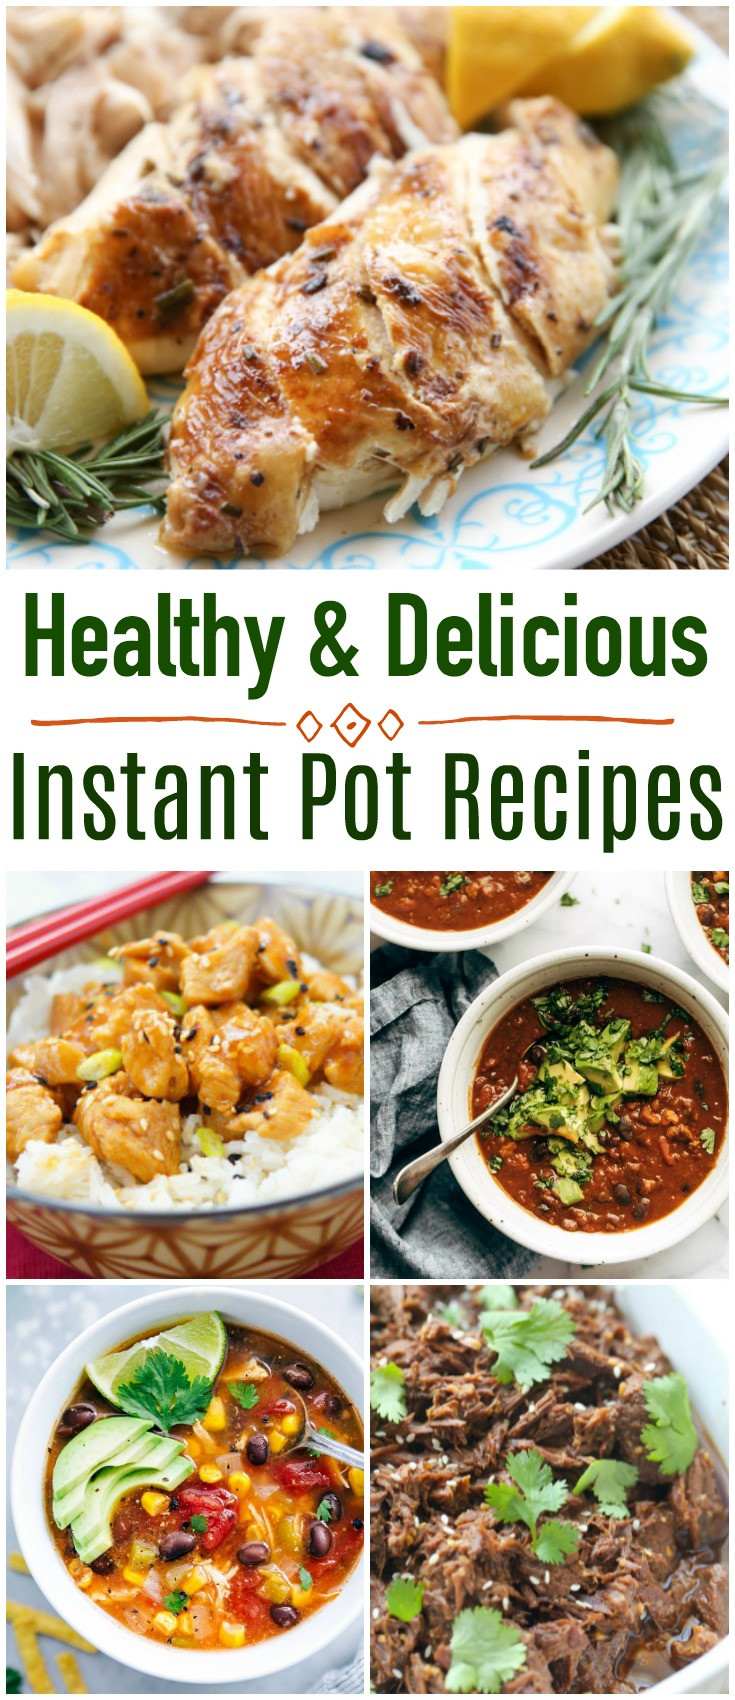 Delicious Instant Pot Recipes
 Healthy and Delicious Recipes for the Instant Pot